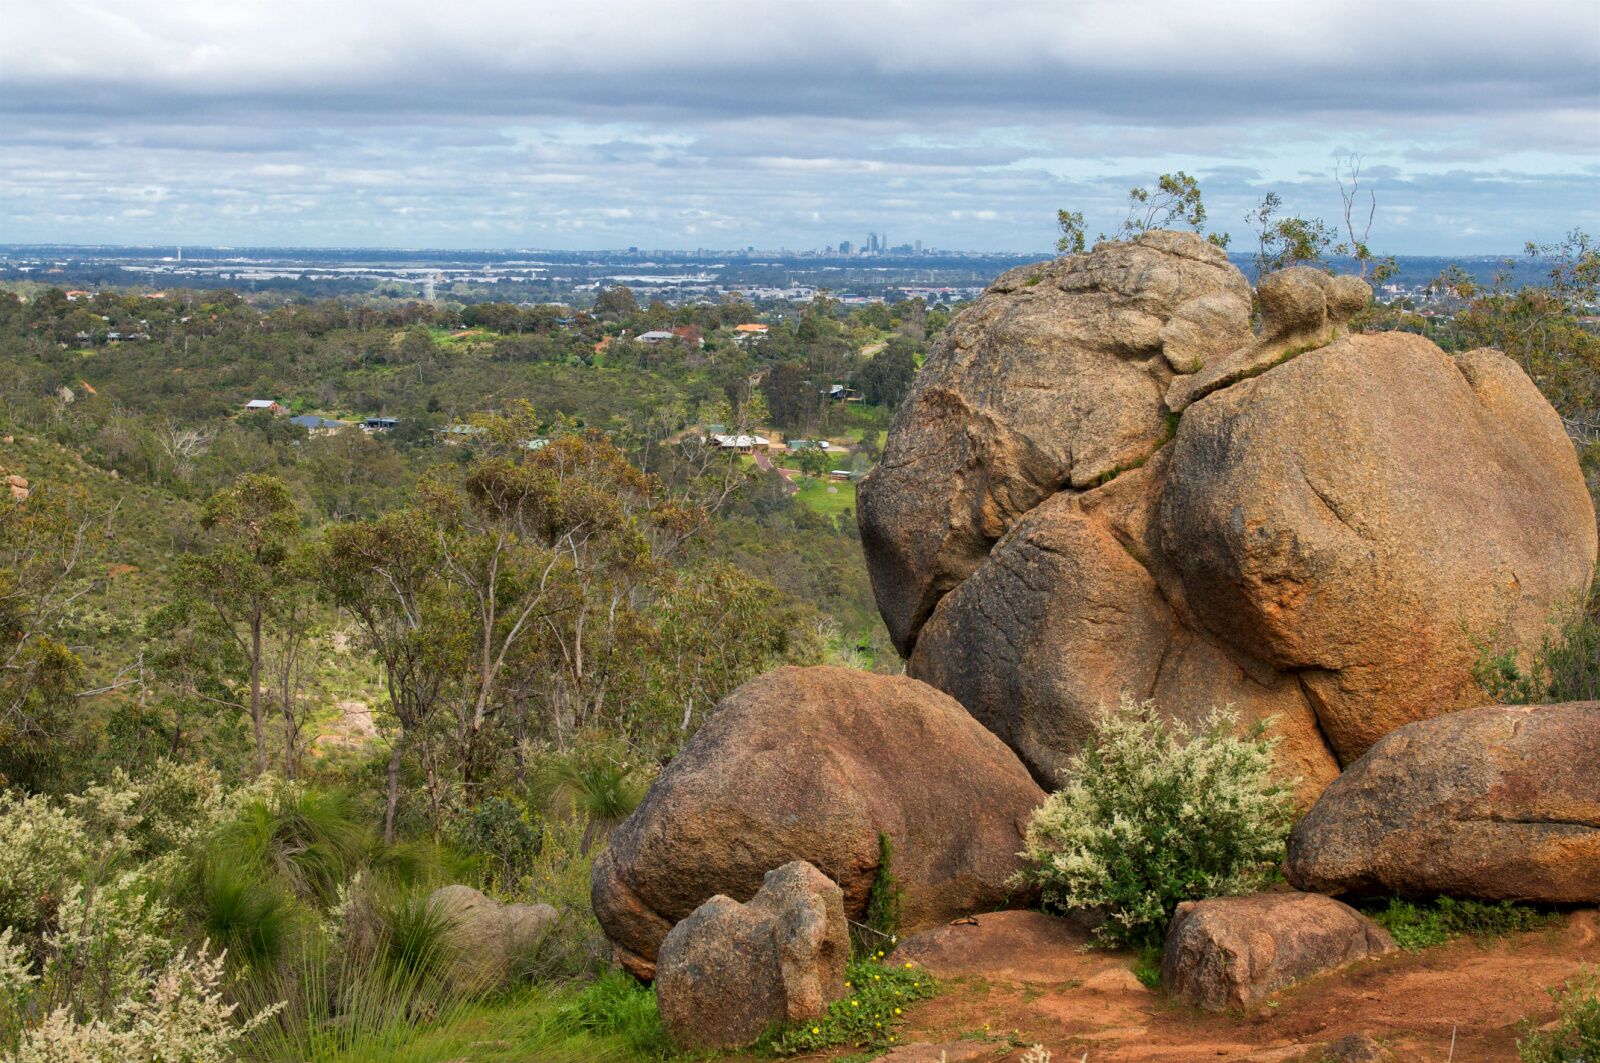 Viewpoint at one of the national parks near Perth, Aus